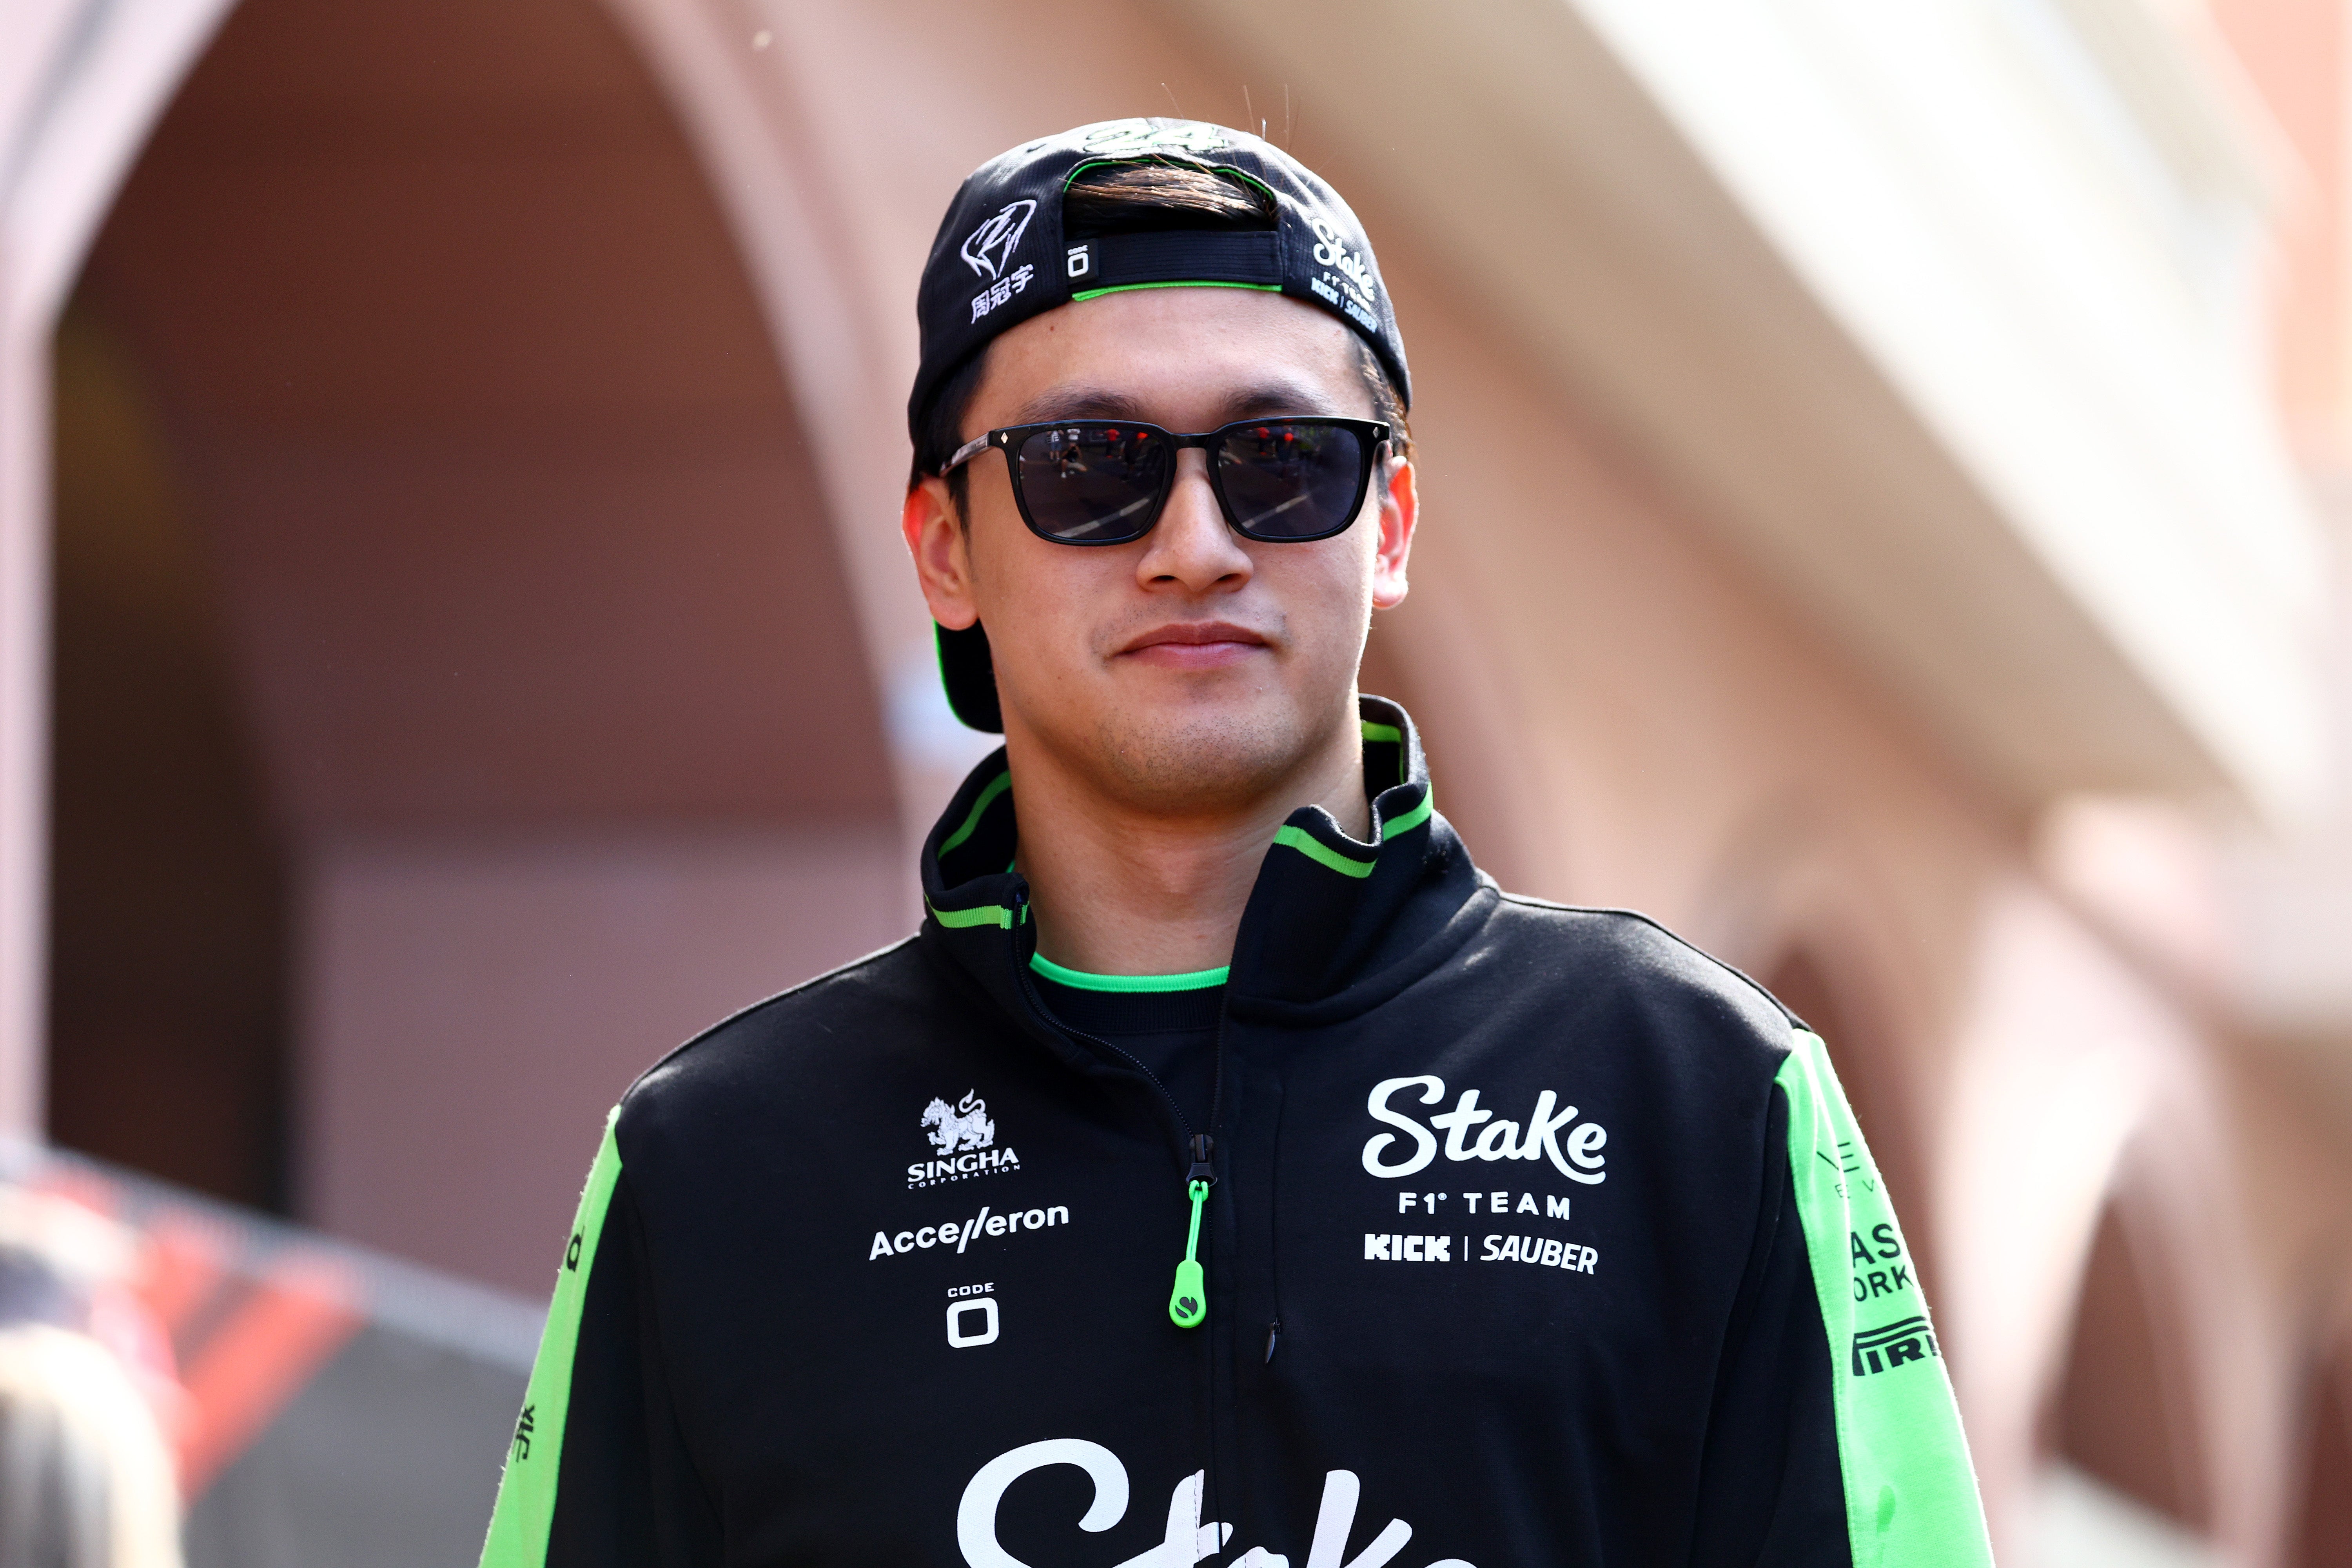 Zhou Guanyu is the first Chinese driver to compete in Formula 1